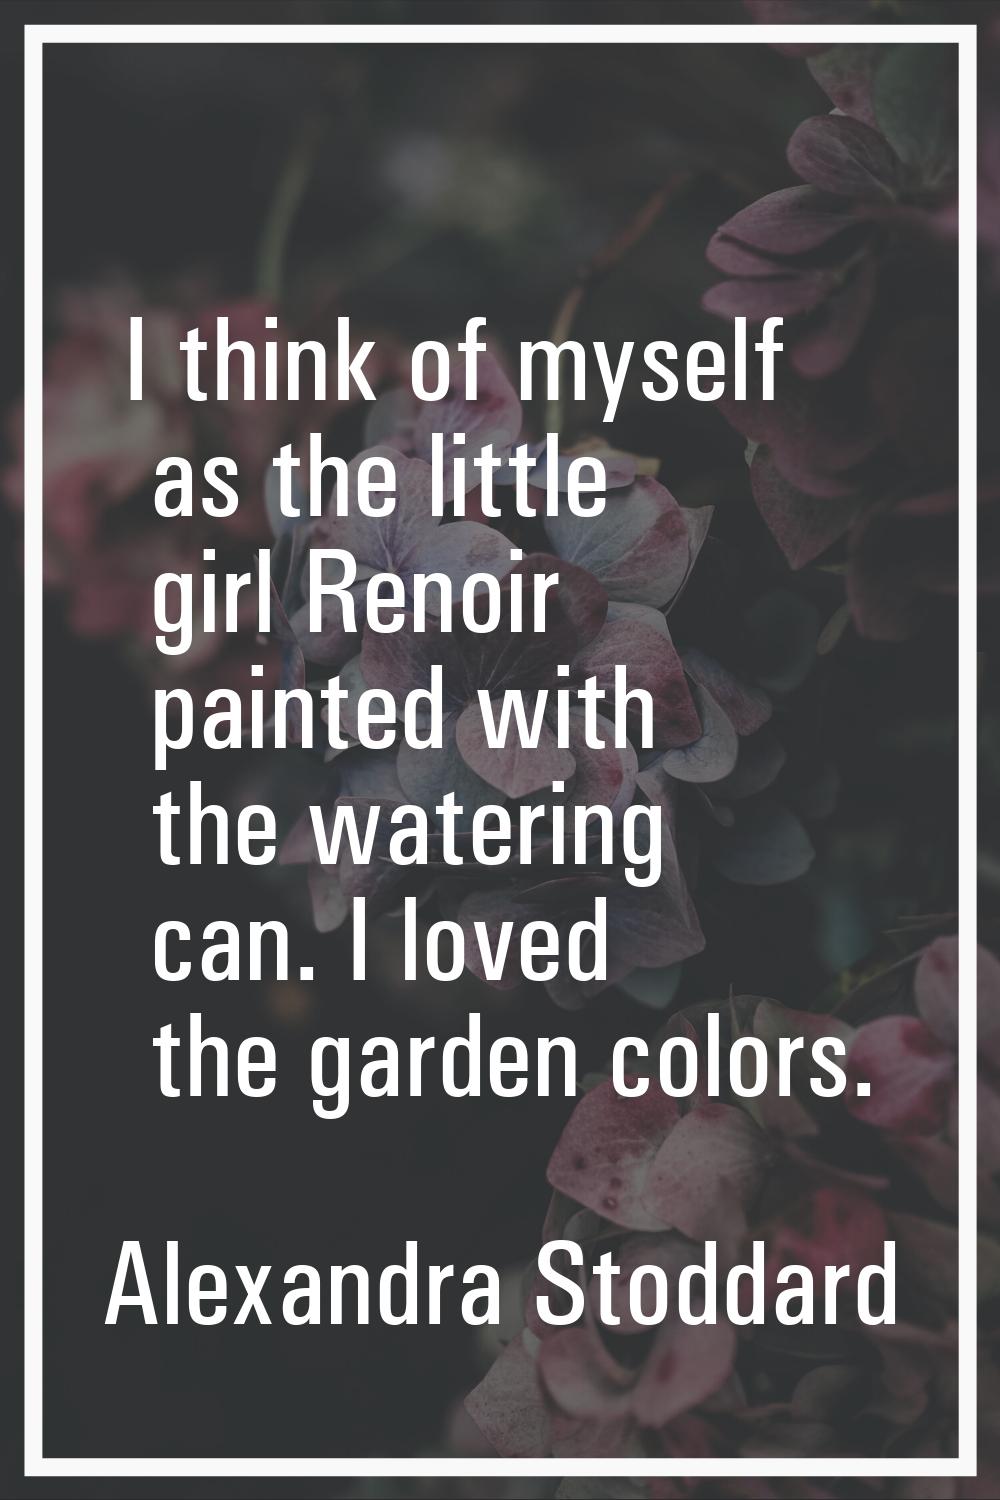 I think of myself as the little girl Renoir painted with the watering can. I loved the garden color